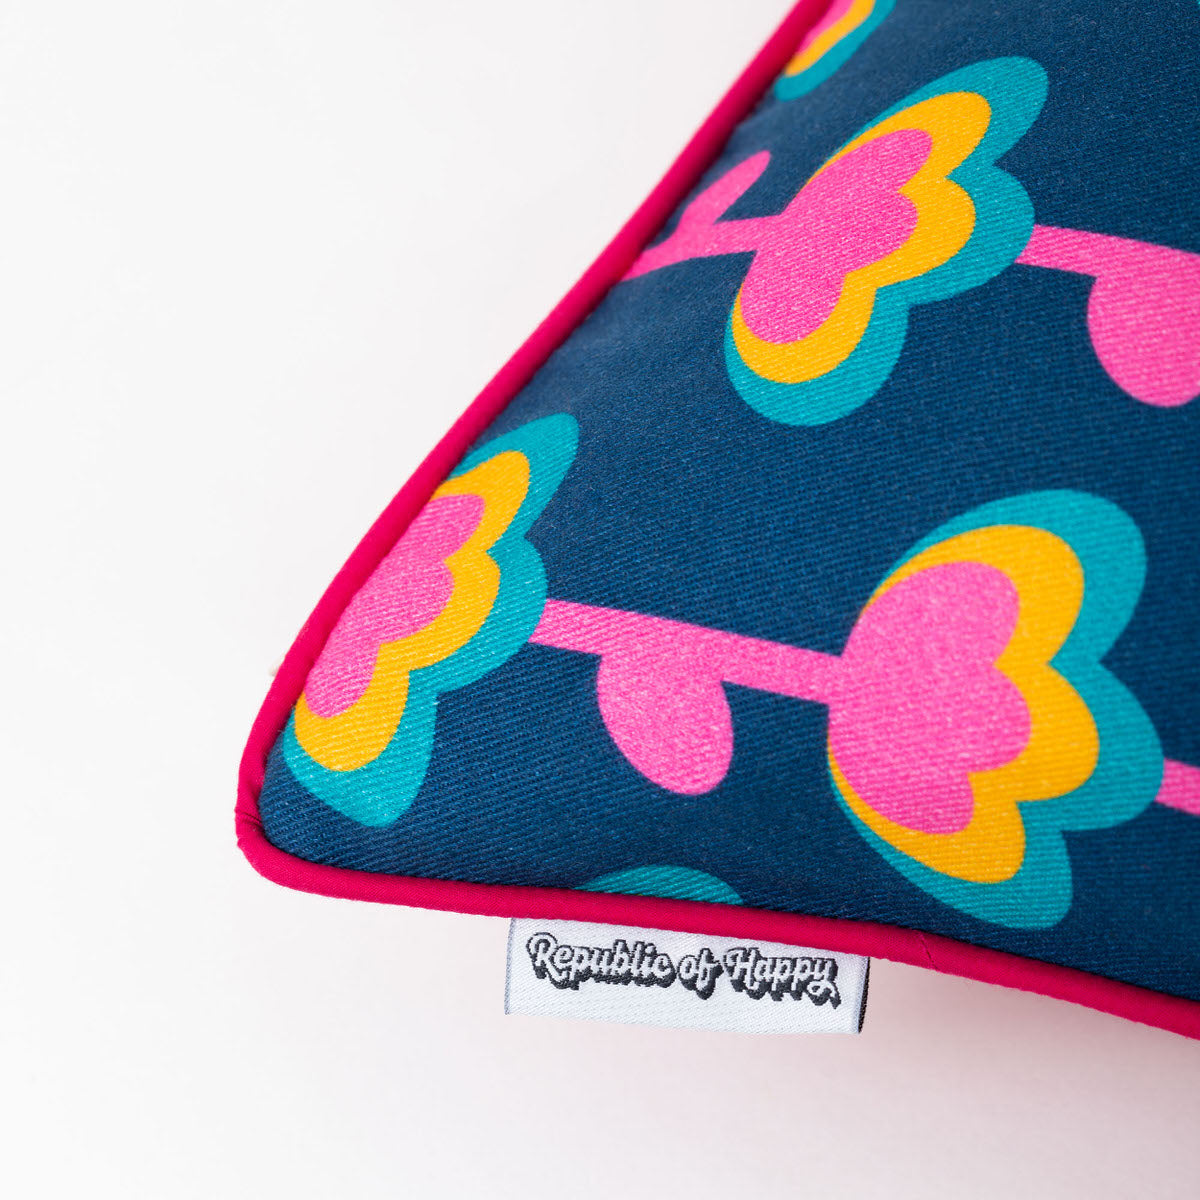 VERTICAL FLOWERS - Bright and colourful double-sided cushion cover